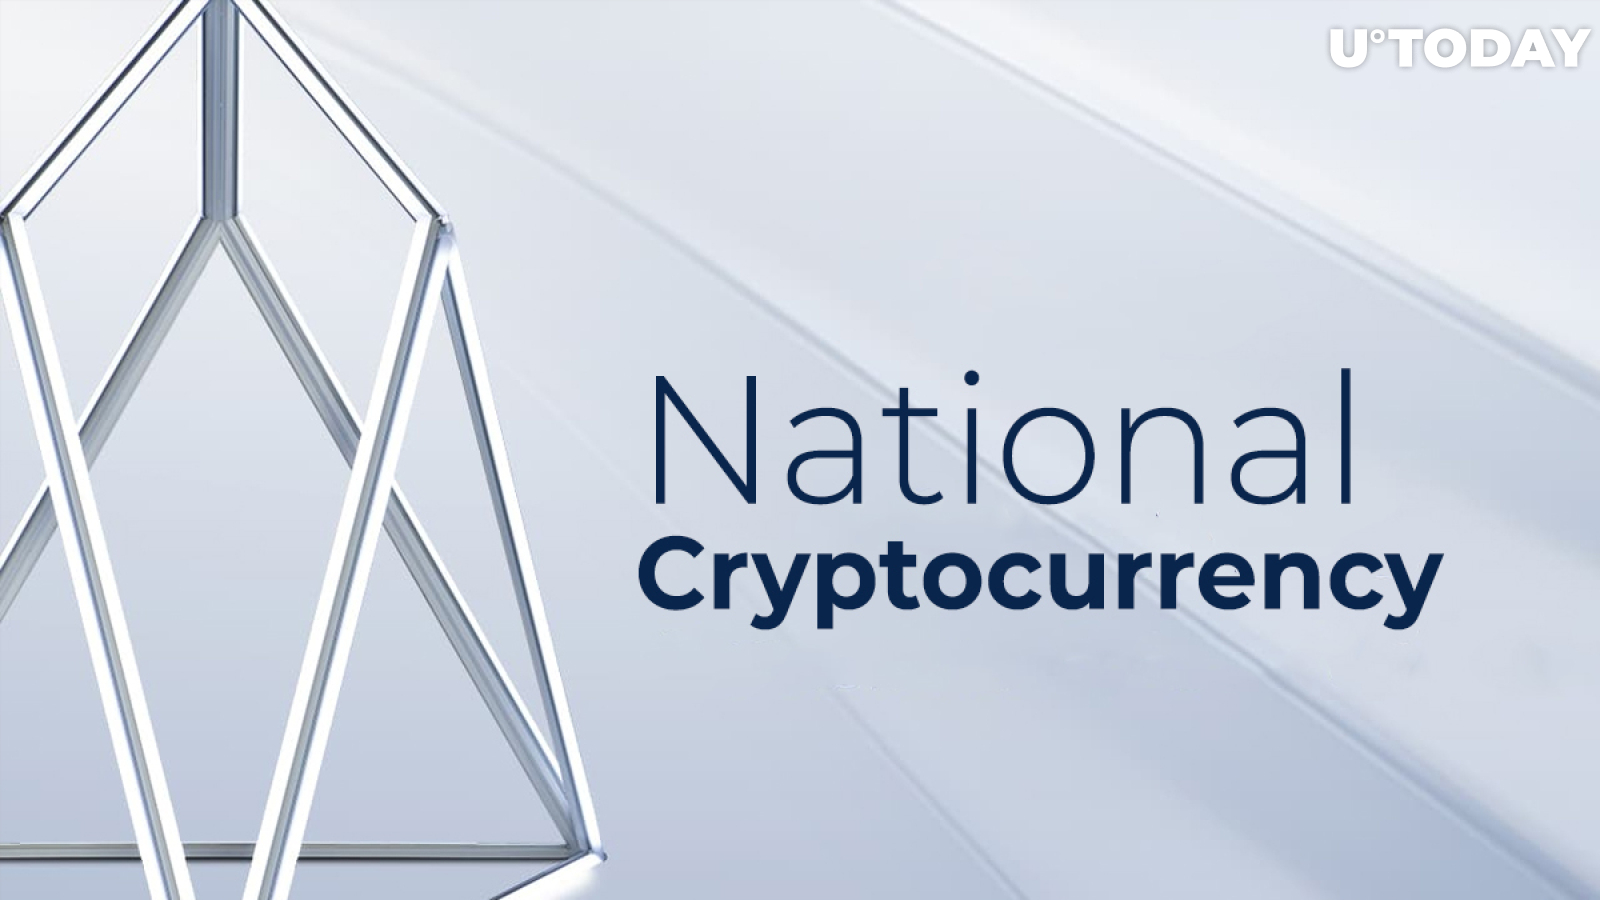 EOS.IO Software Will Host National Cryptocurrency: Details